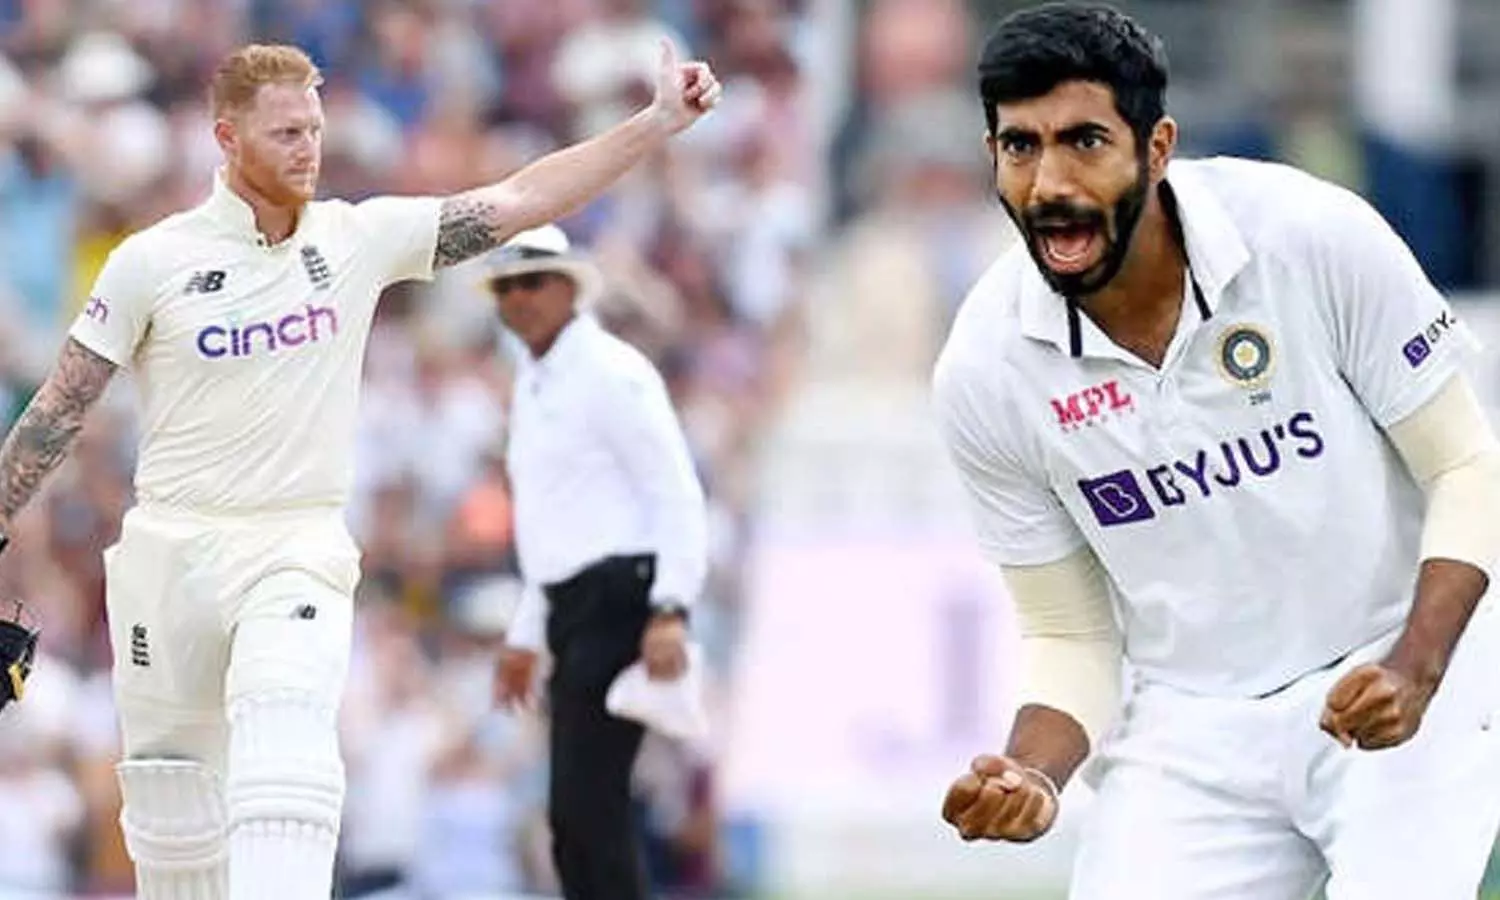 Englands team created history by defeating India, great batting of Root and Bairstow